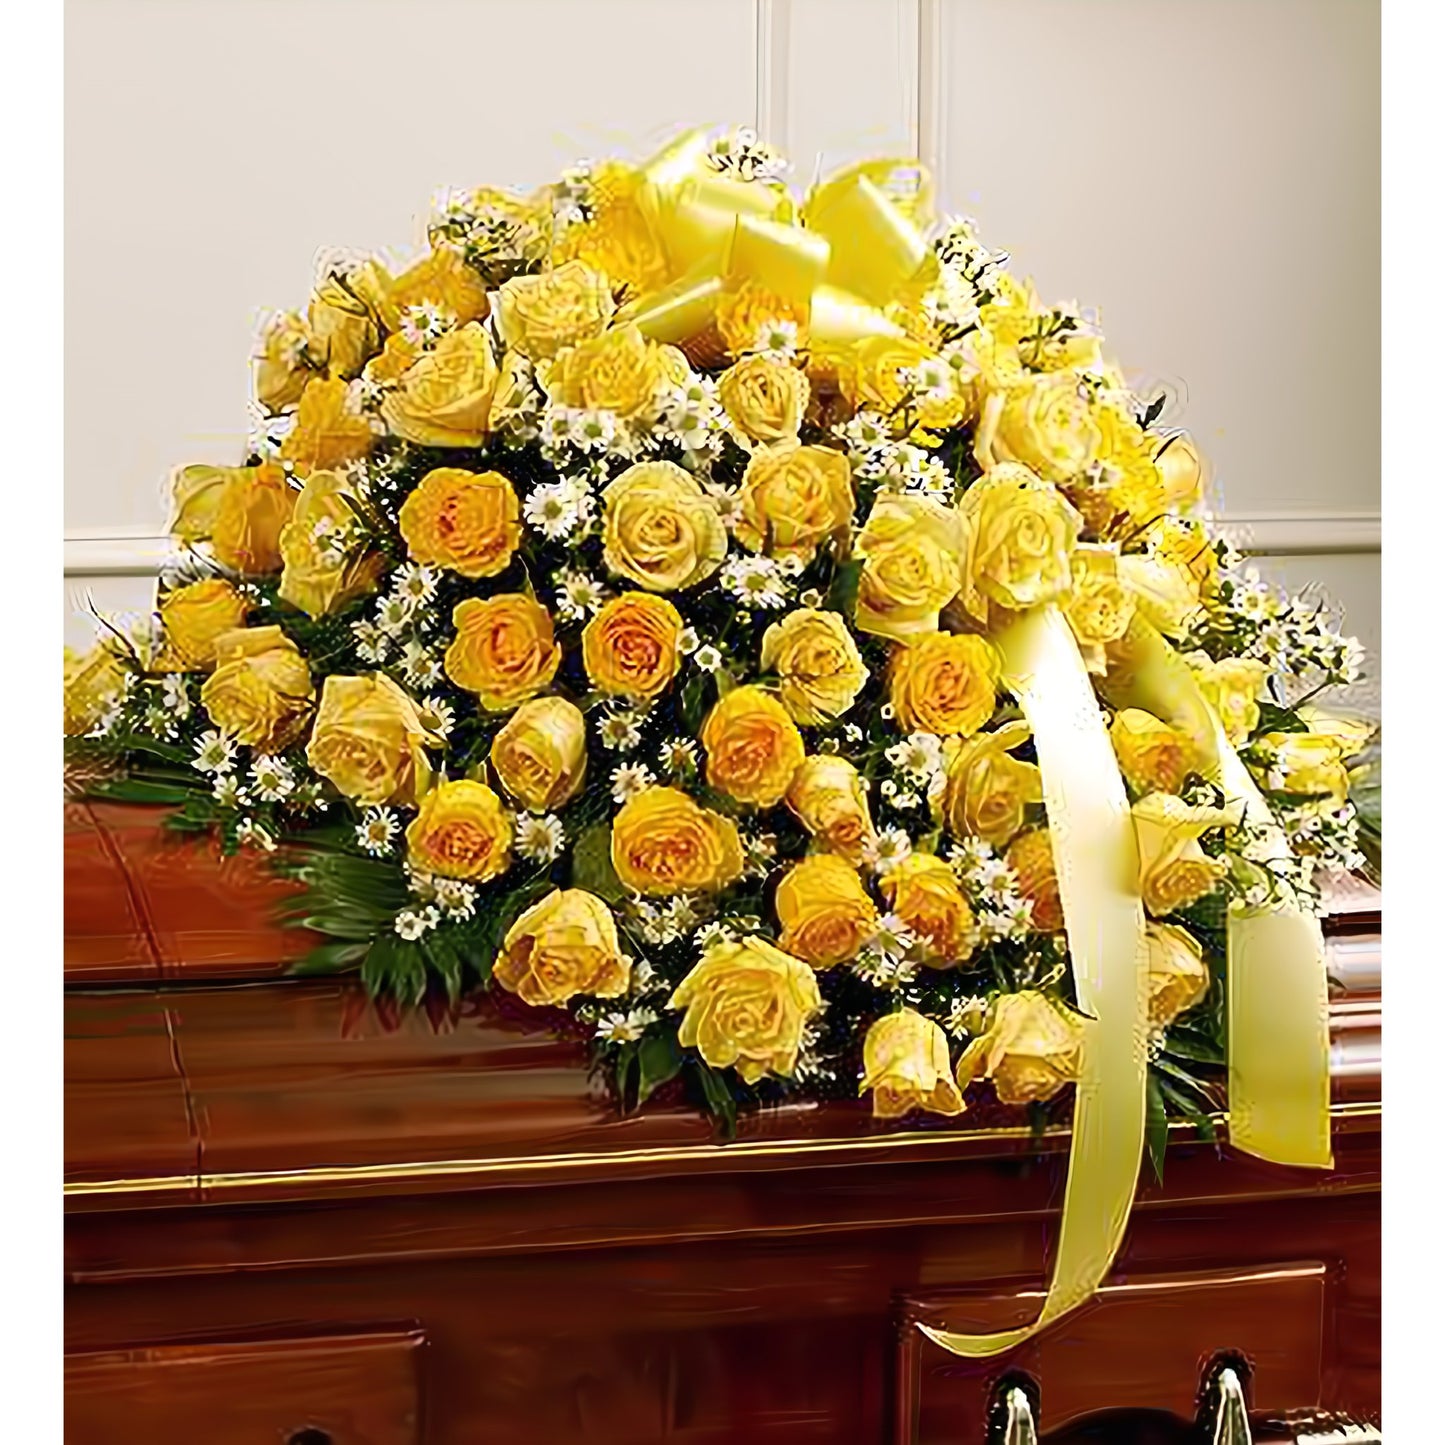 Cherished Memories Rose Half Casket Cover - Yellow - Floral_Arrangement - Flower Delivery NYC